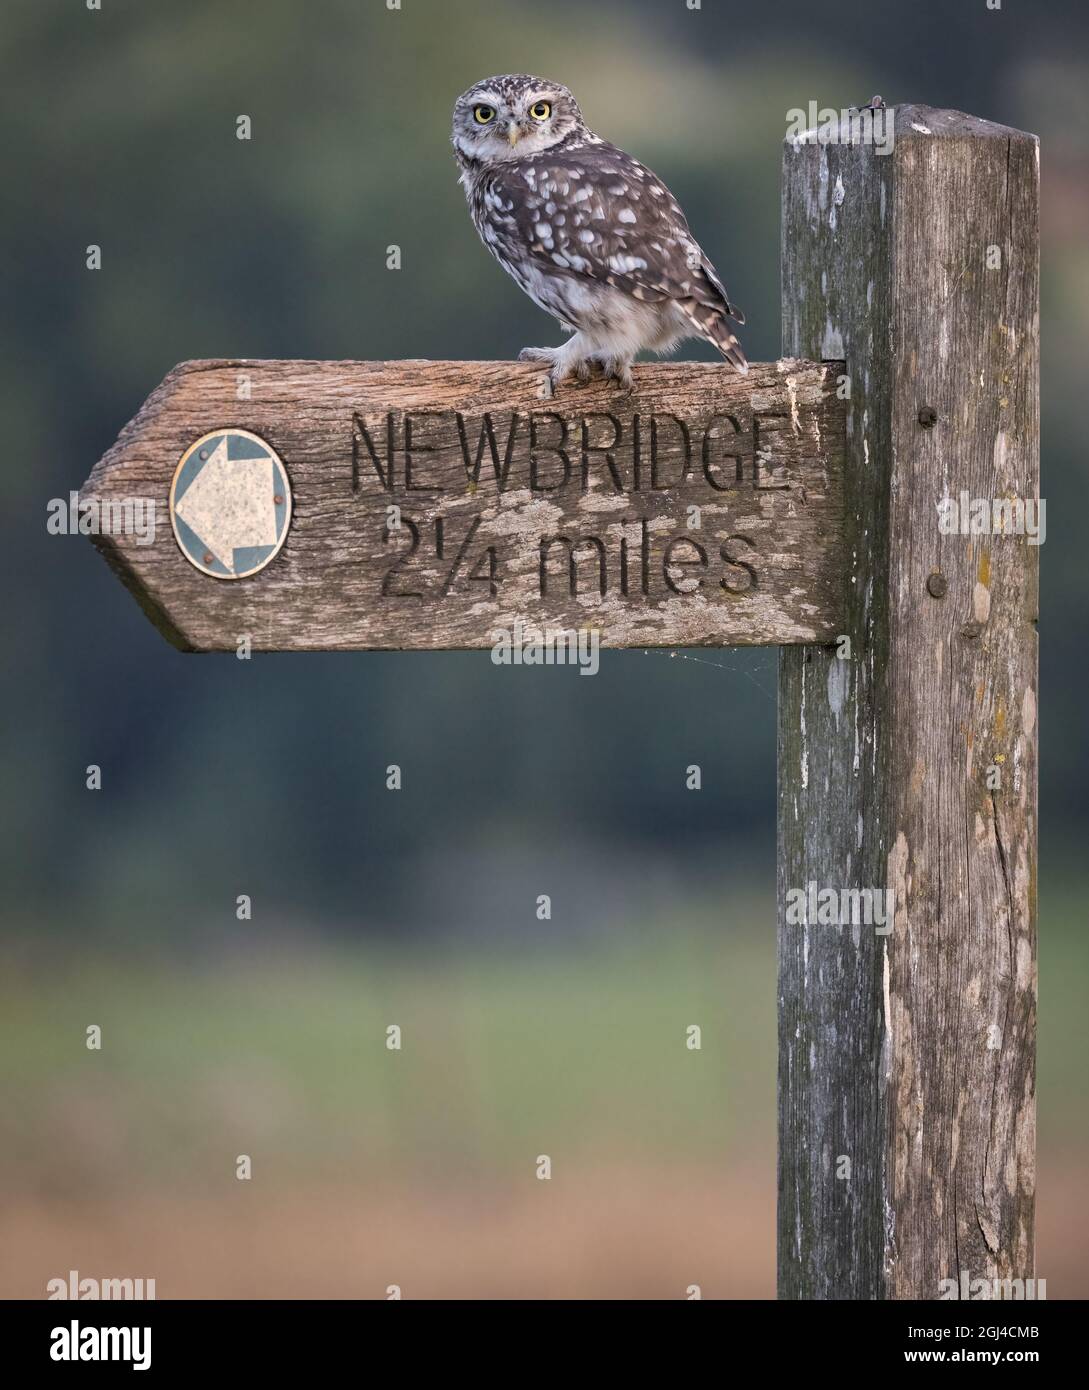 An Adult Little Owl rests on a perch in the British countryside late into the evening. Stock Photo